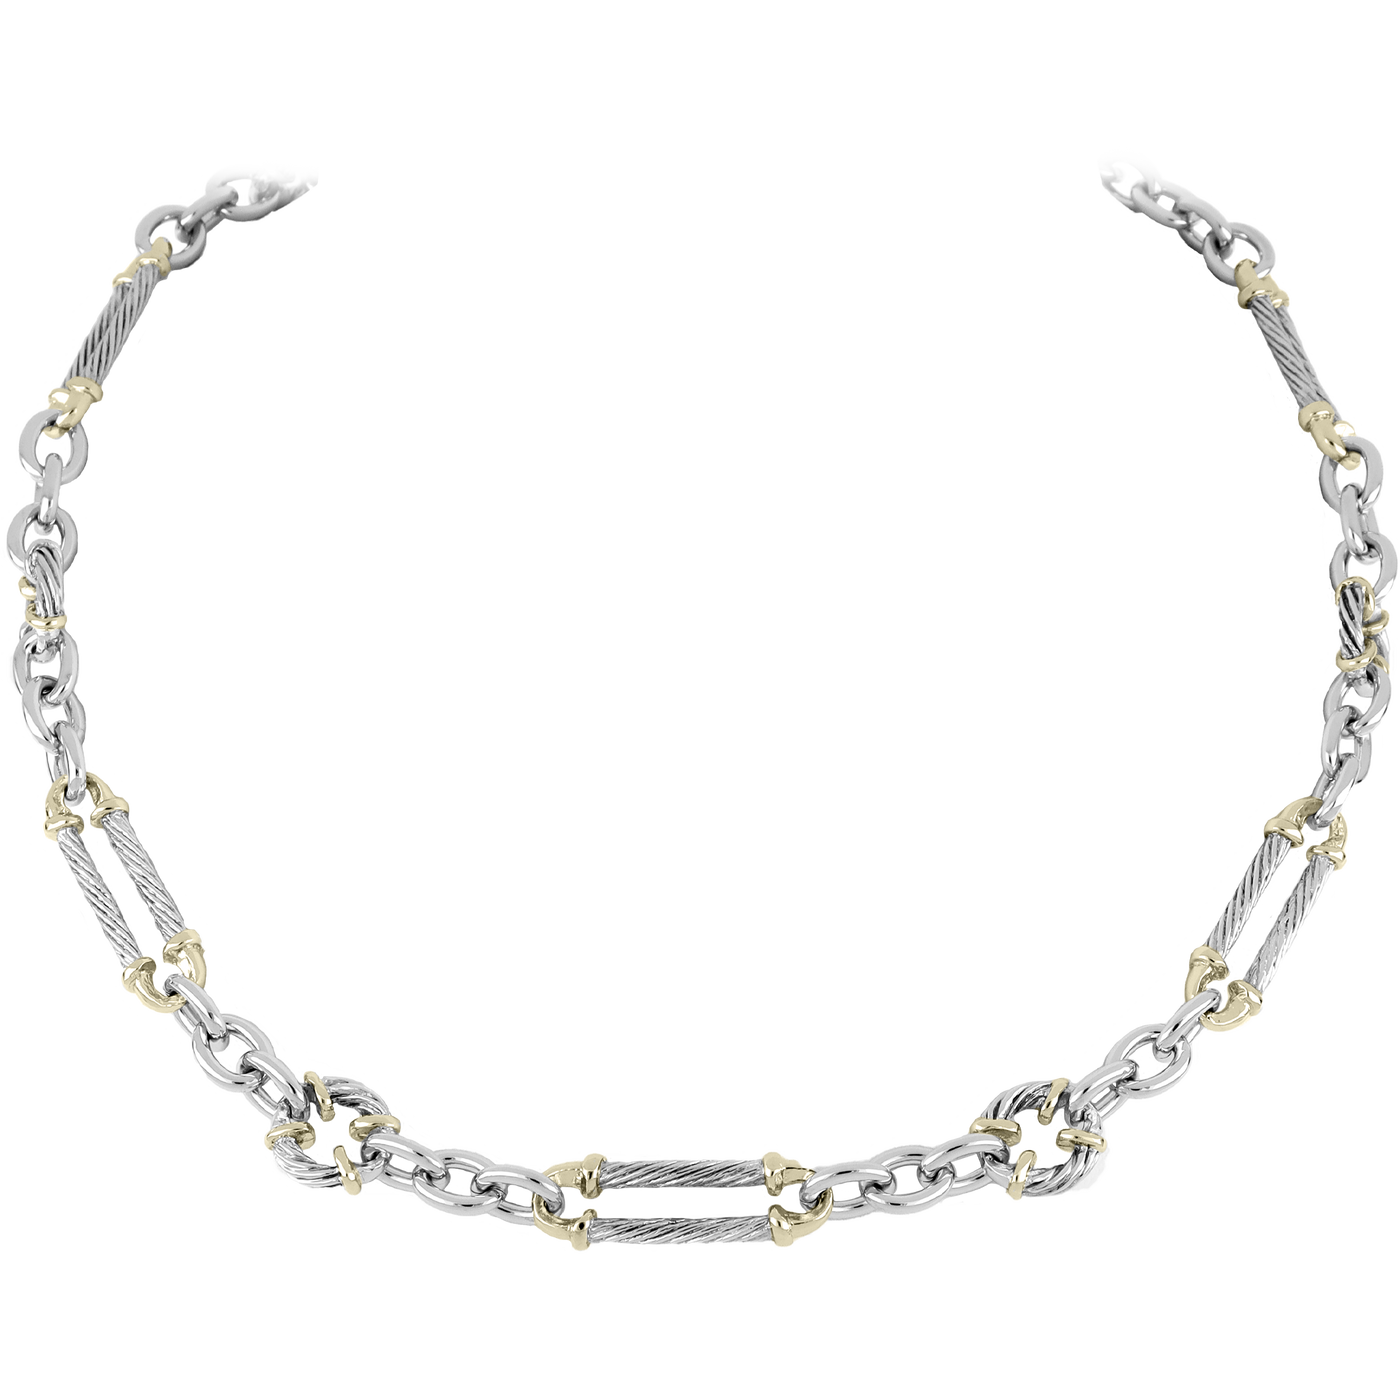 Cordão Collection - Large Oval & Circle Two-Tone Necklace